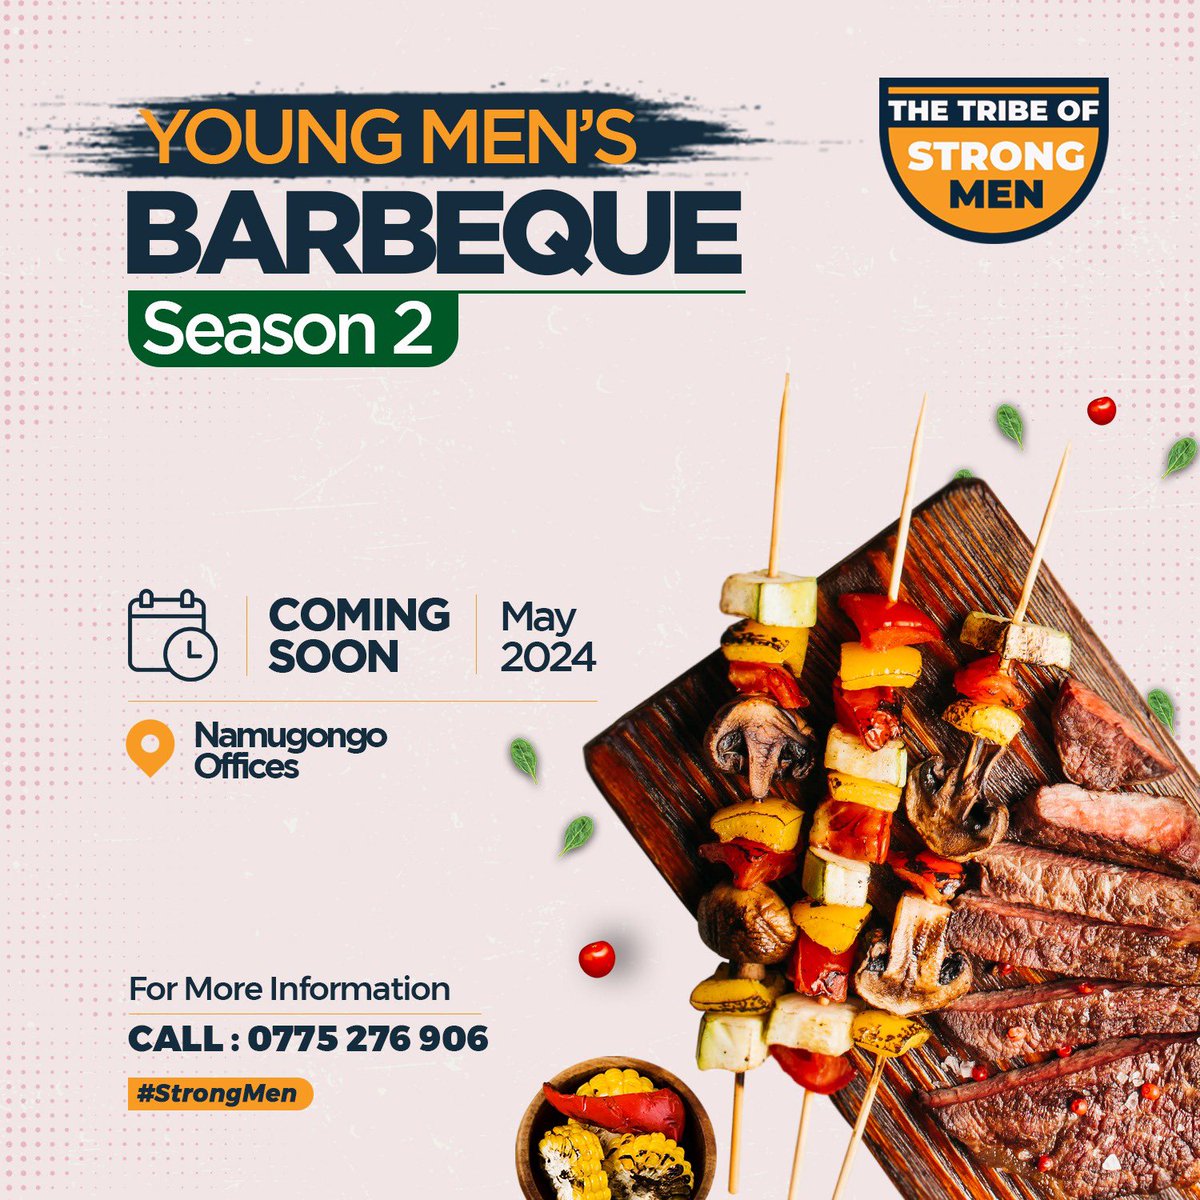 Big announcement 📣 📣 Young Men’s Barbecue SEASON 2: This May Start making your booking to be added on the list by calling Simon: